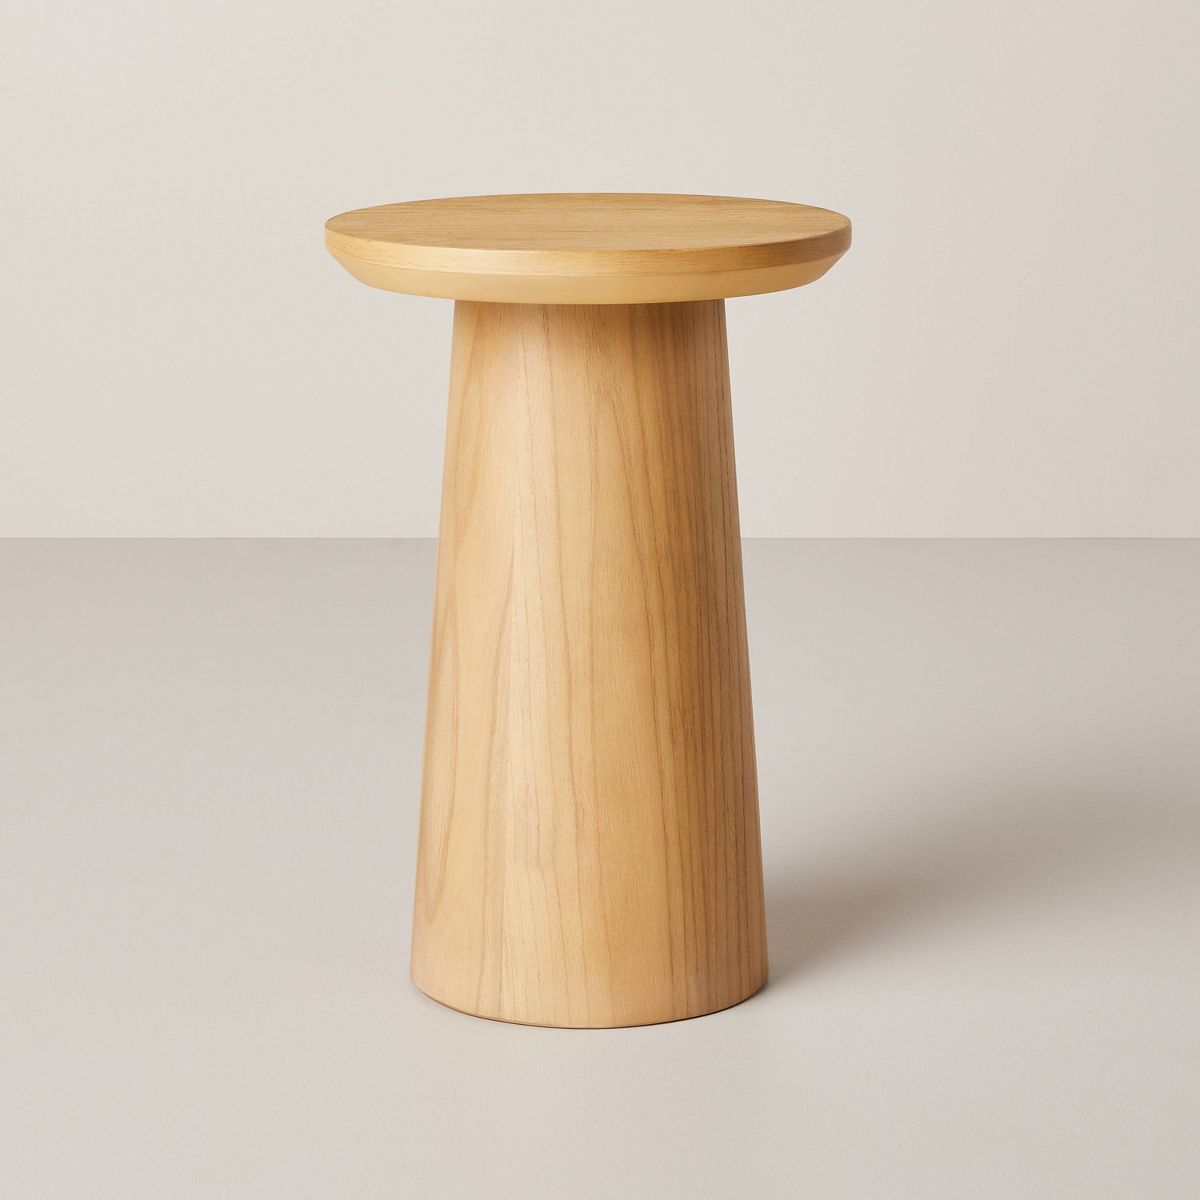 Wooden Round Pedestal Accent Drink Table - Hearth & Hand™ with Magnolia | Target